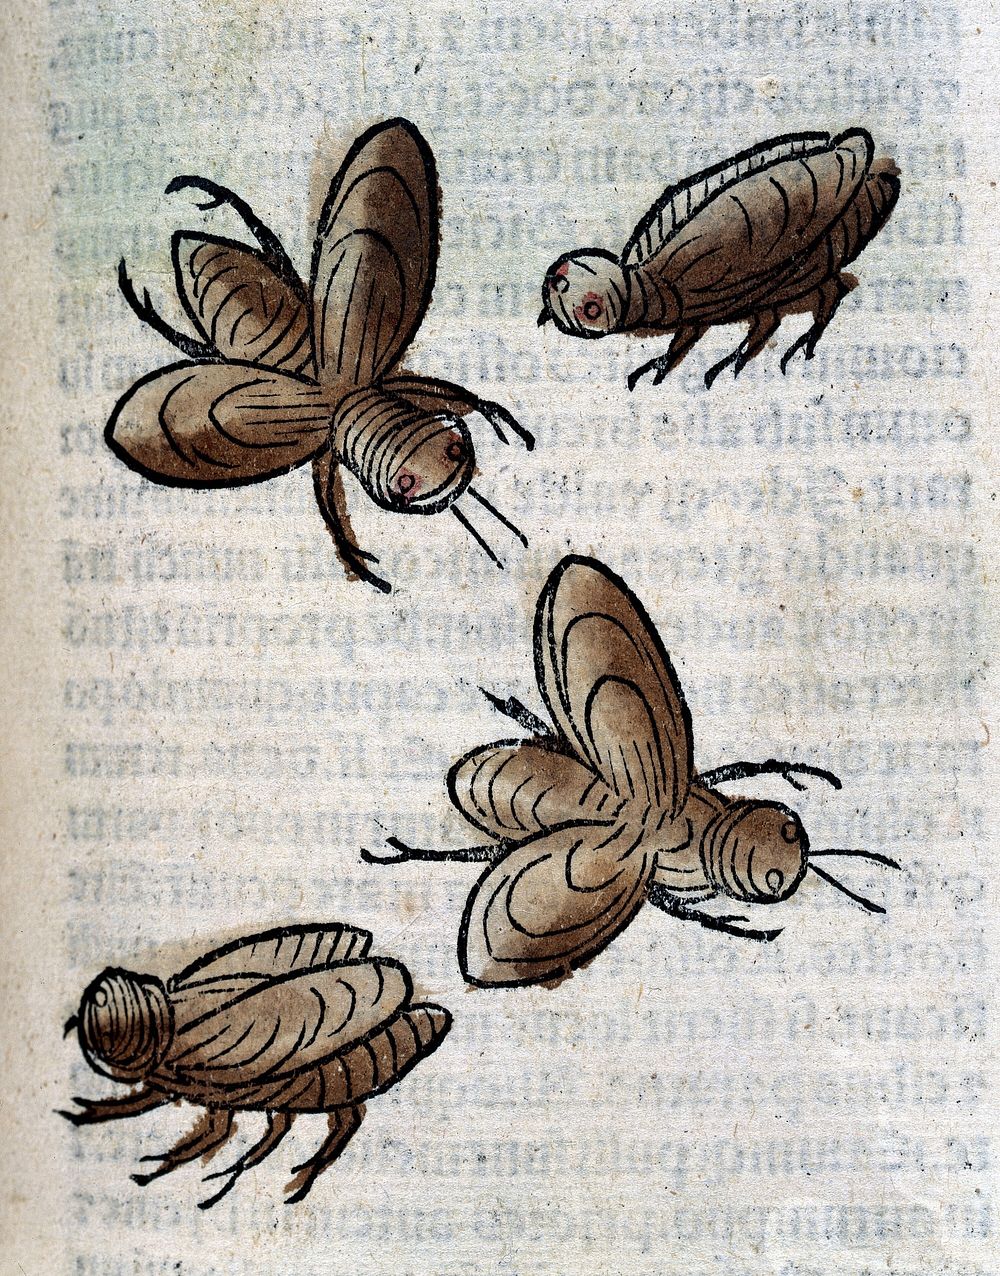 Four insects, possibly bees, woodcut, 1547